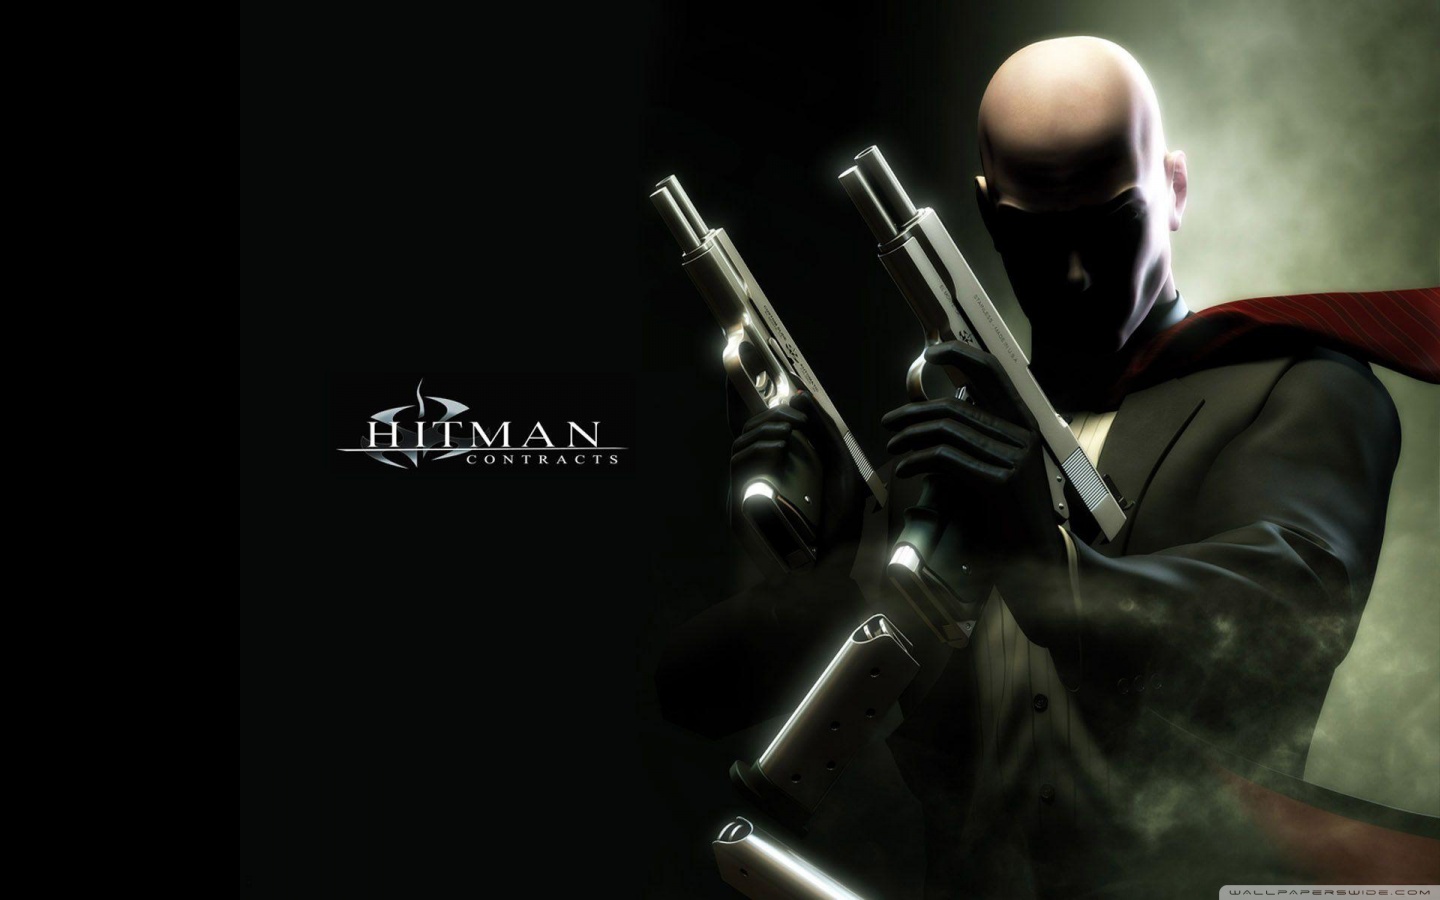 Edited Hitman 3 wallpapers for different resolutions with and wo logo   rHiTMAN